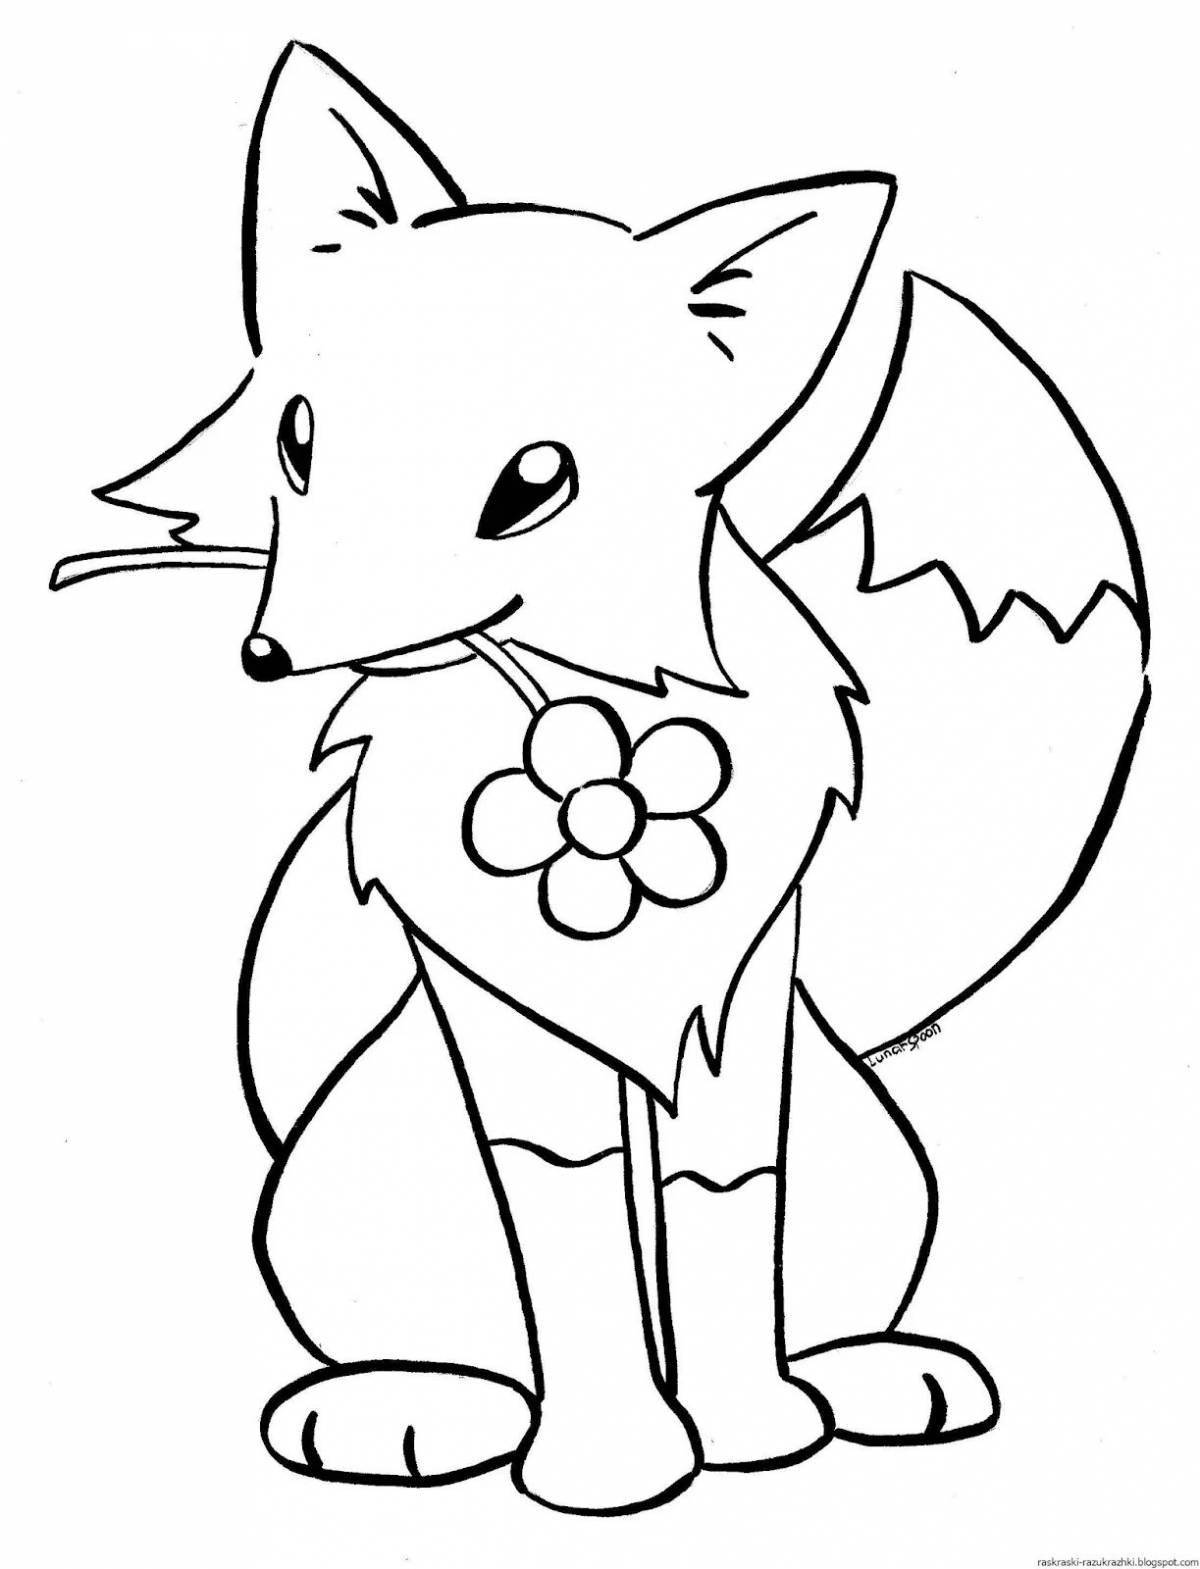 Whimsical fox drawing for kids